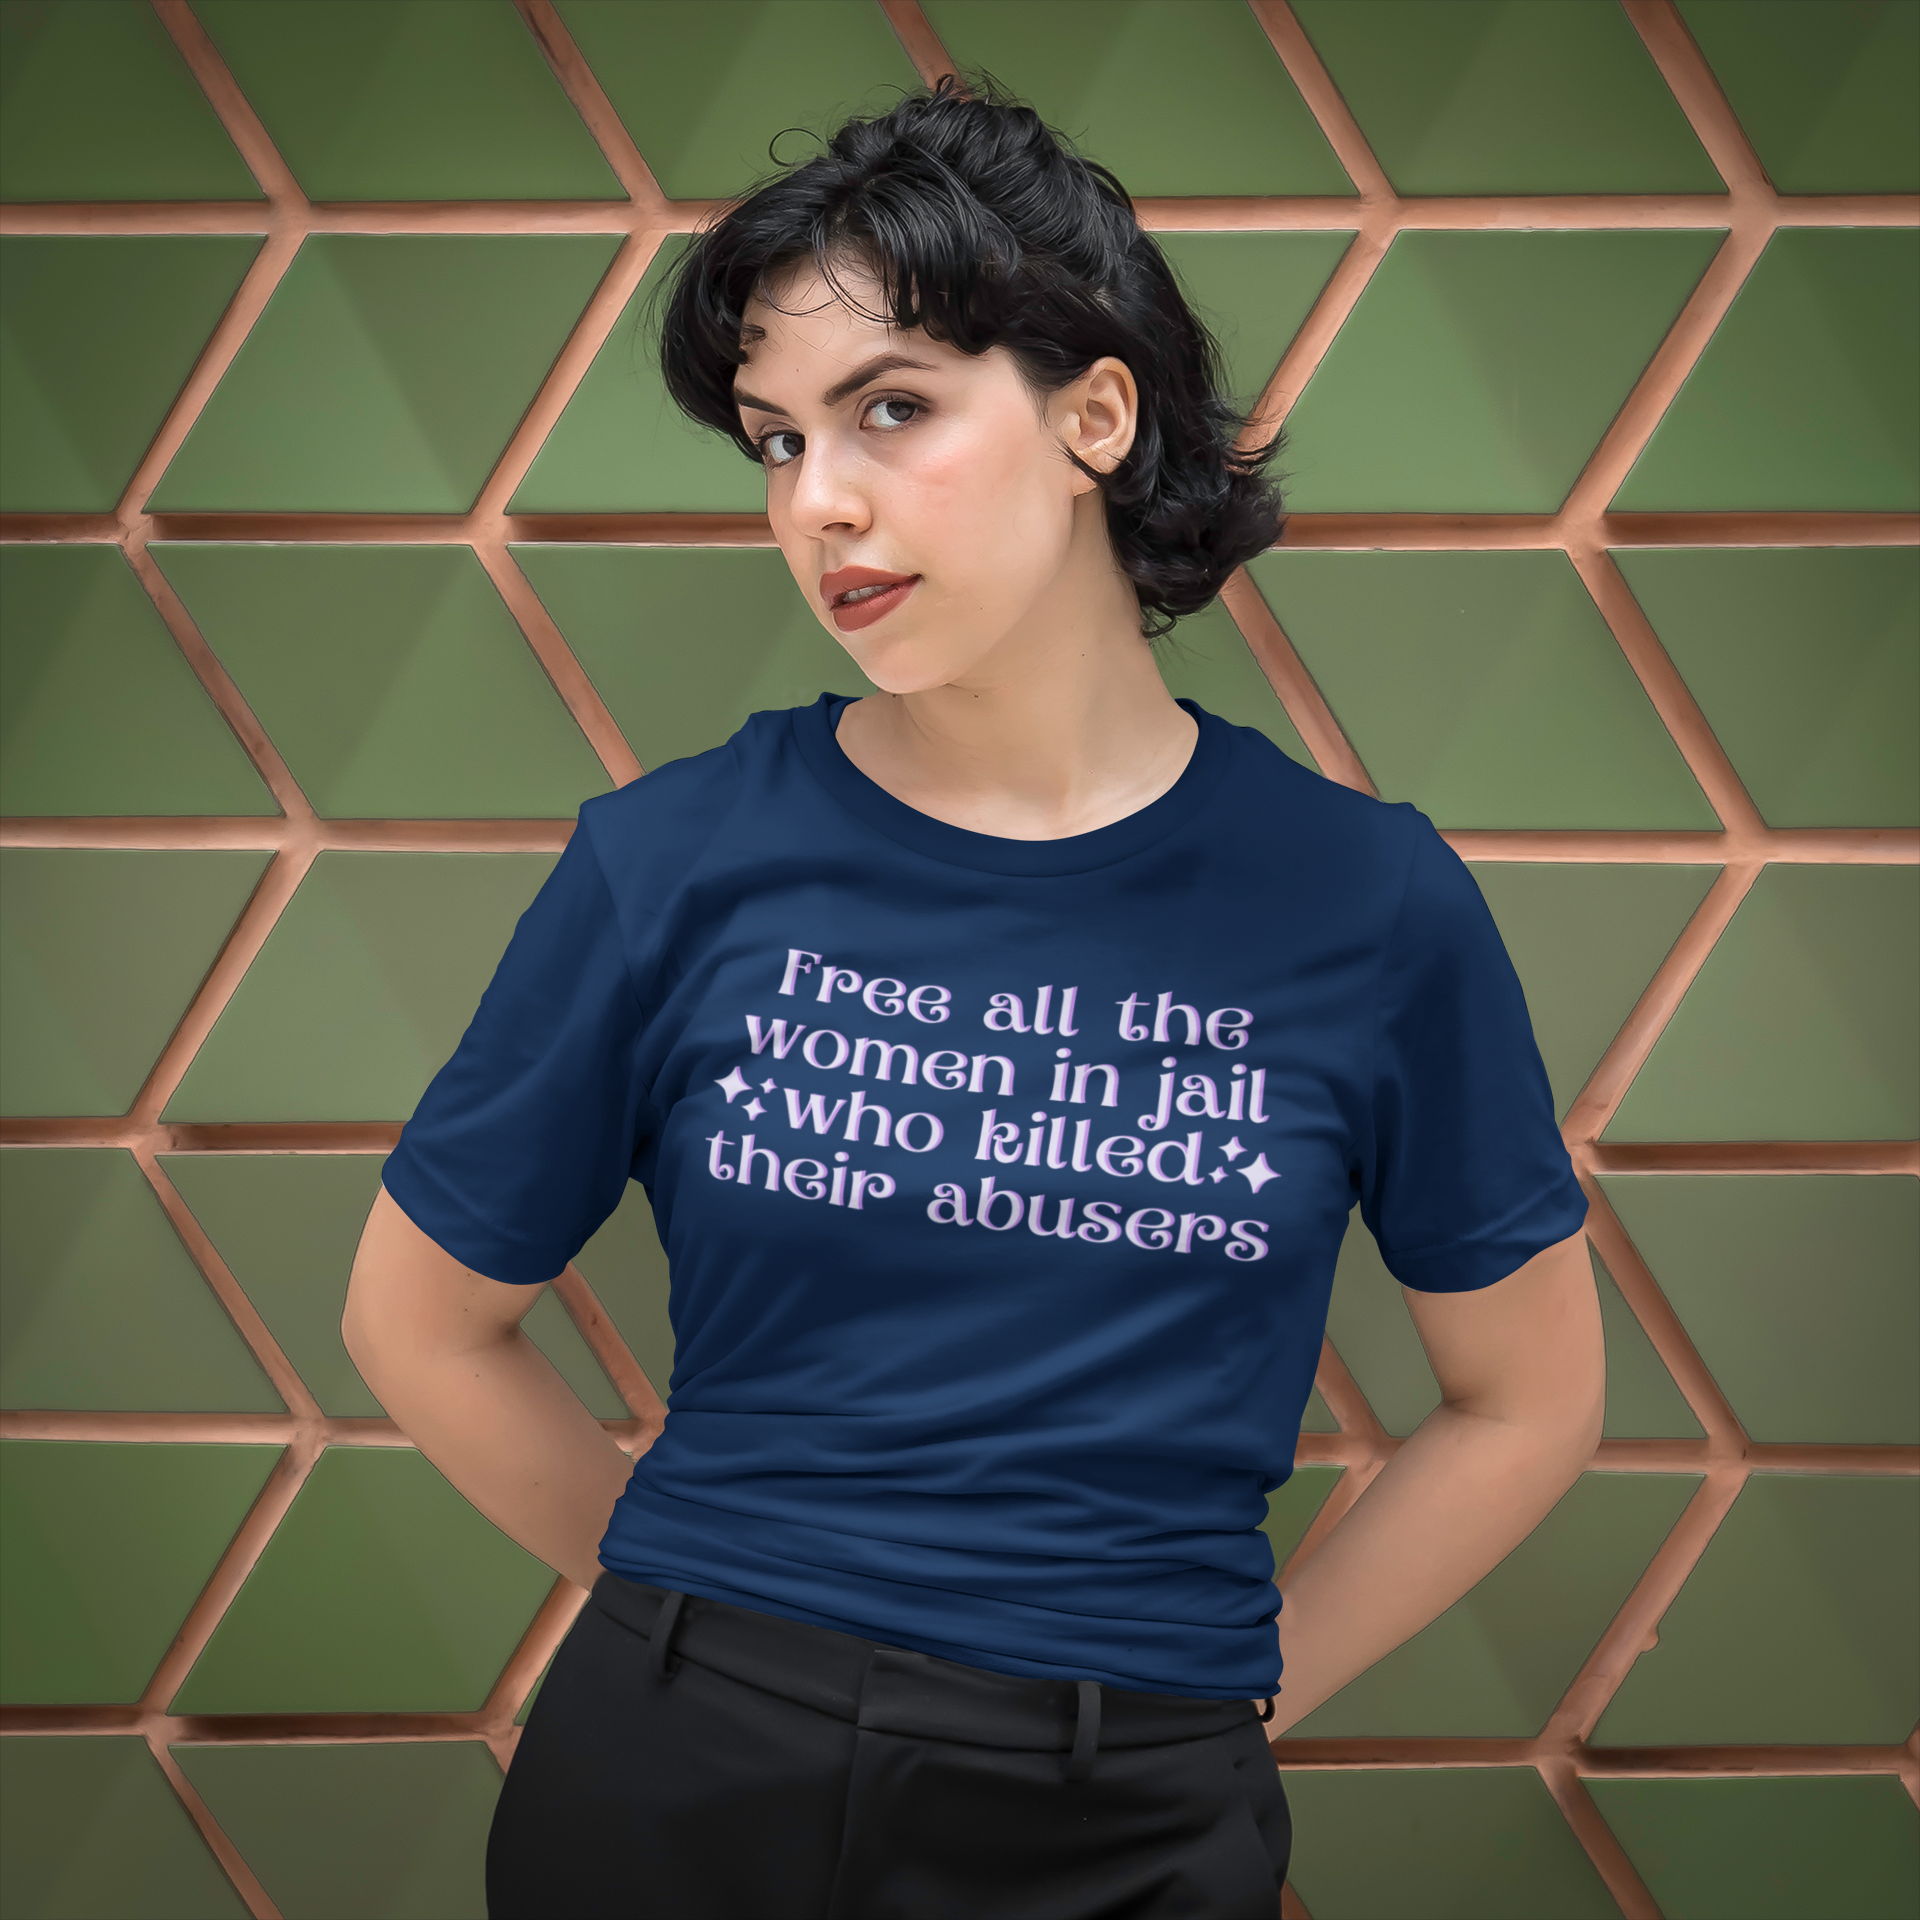 Free All The Women In Jail Who Killed Their Abusers Unisex Feminist T-shirt - Shop Women’s Rights T-shirts - Feminist Trash Store - Oversized Women’s Navy T-shirt